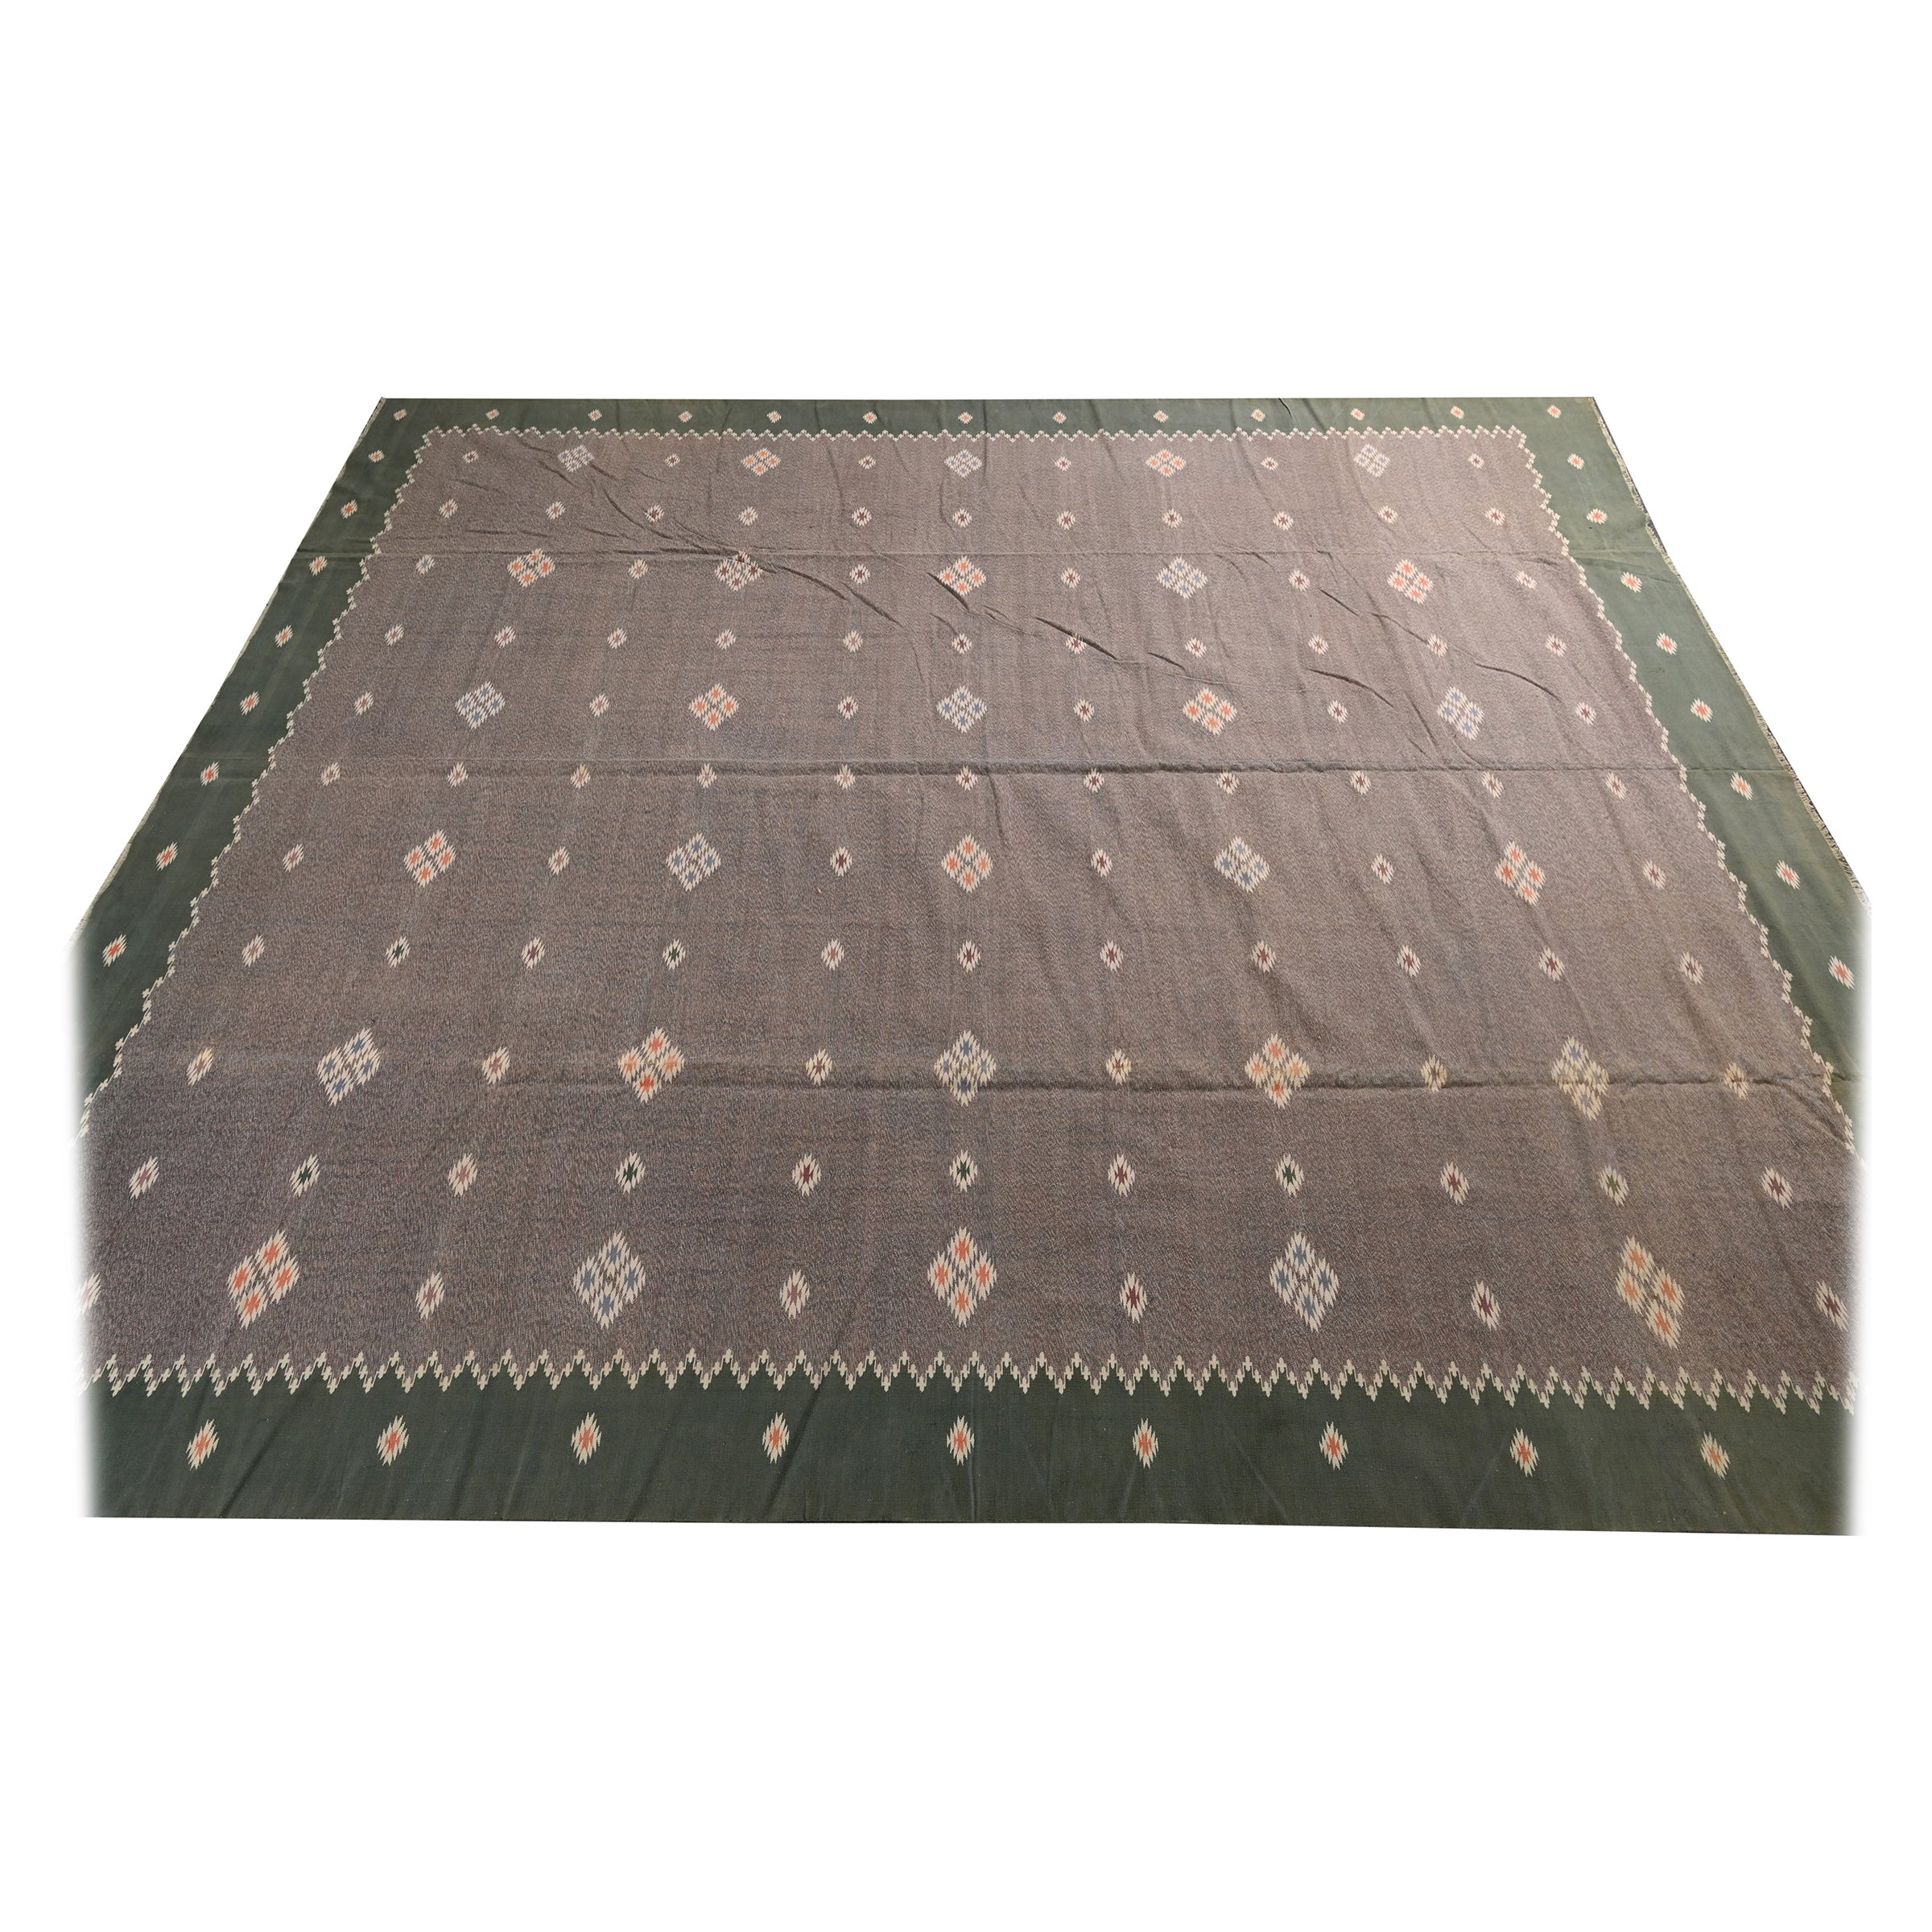 Vintage Dhurrie Flat Weave in Taupe with Geometric Patterns by Rug & Kilim For Sale